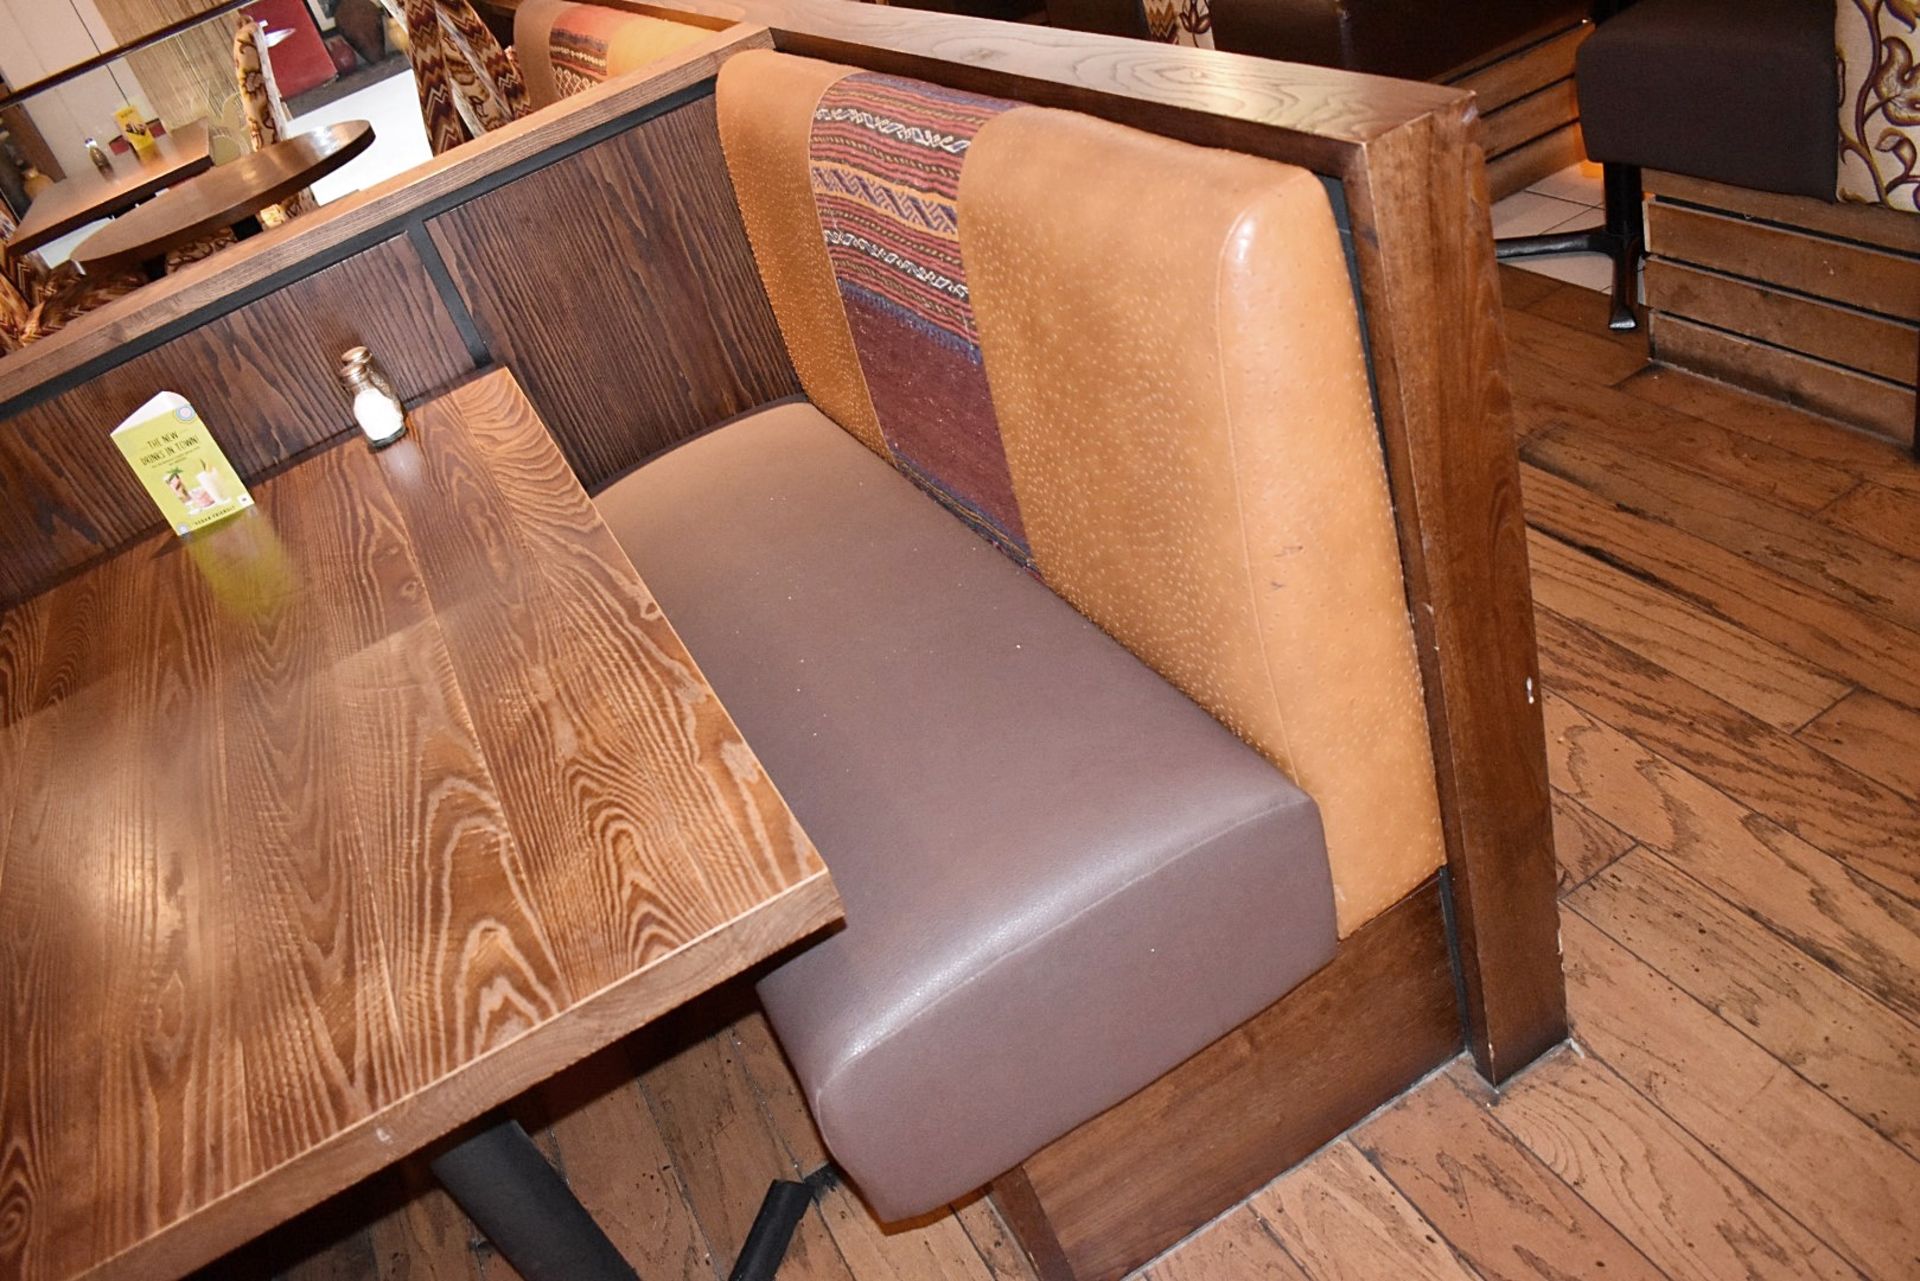 15-Pieces Of Restaurant Booth Seating Of Varying Length - Image 21 of 22